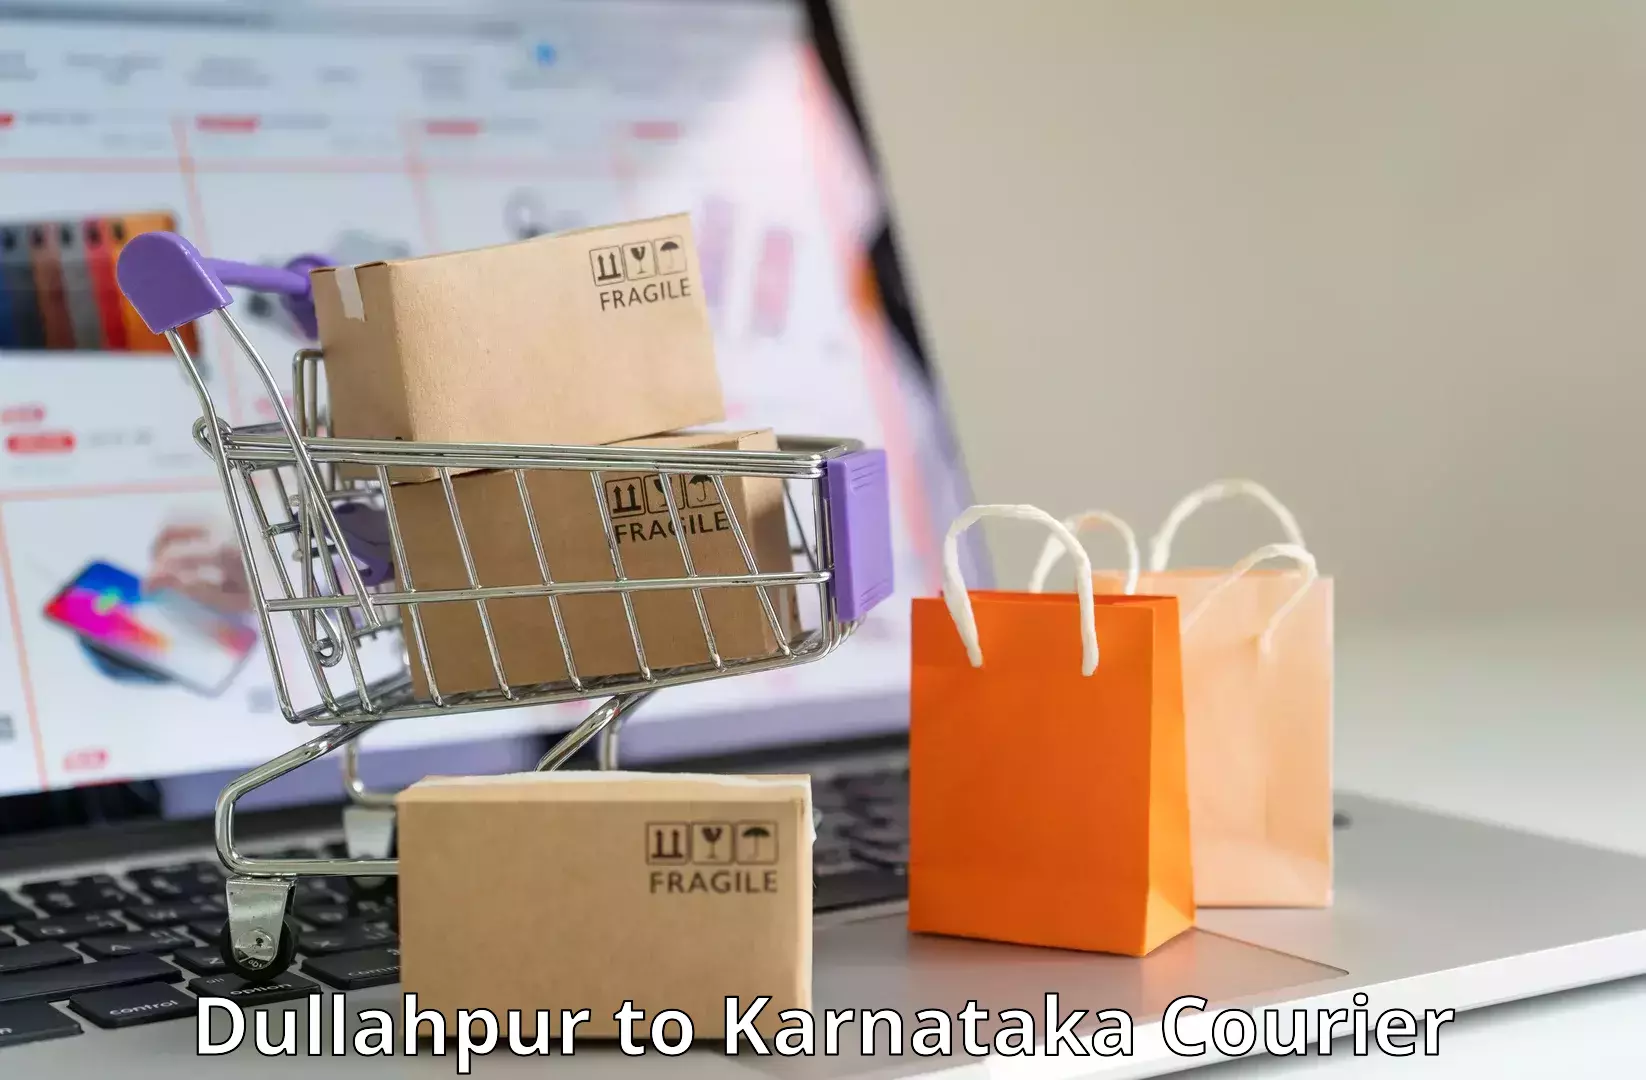 Professional courier handling Dullahpur to Sirsi